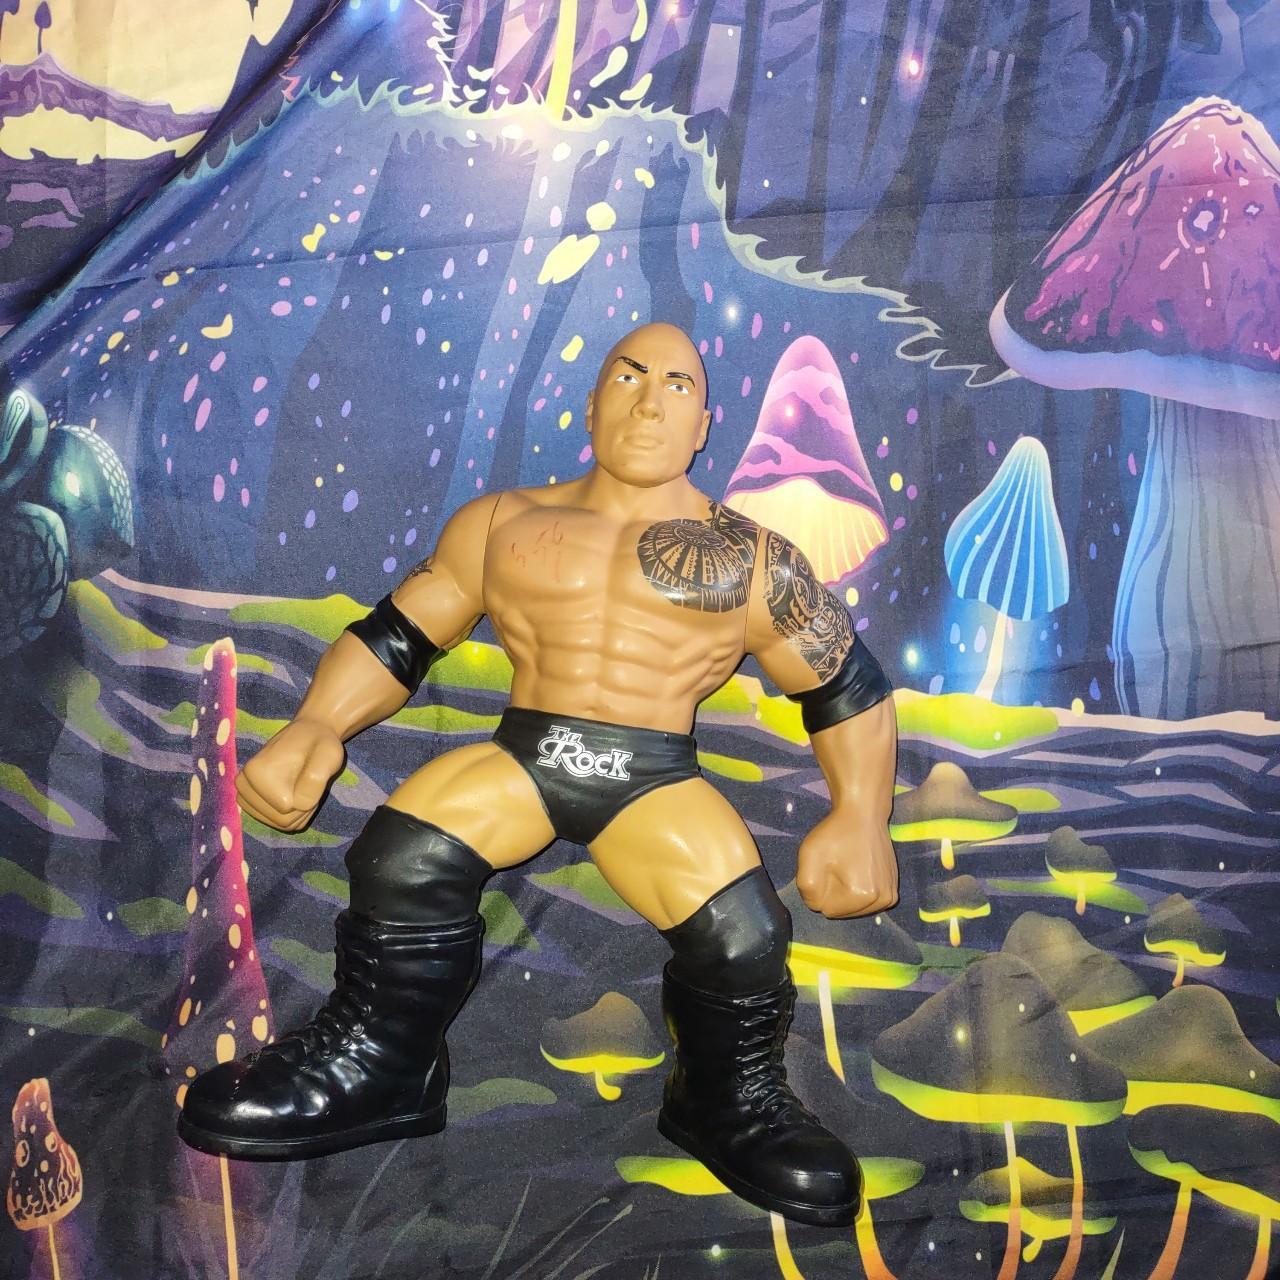 Product Image 1 - The Rock Figure

WWE's Dwayne "The